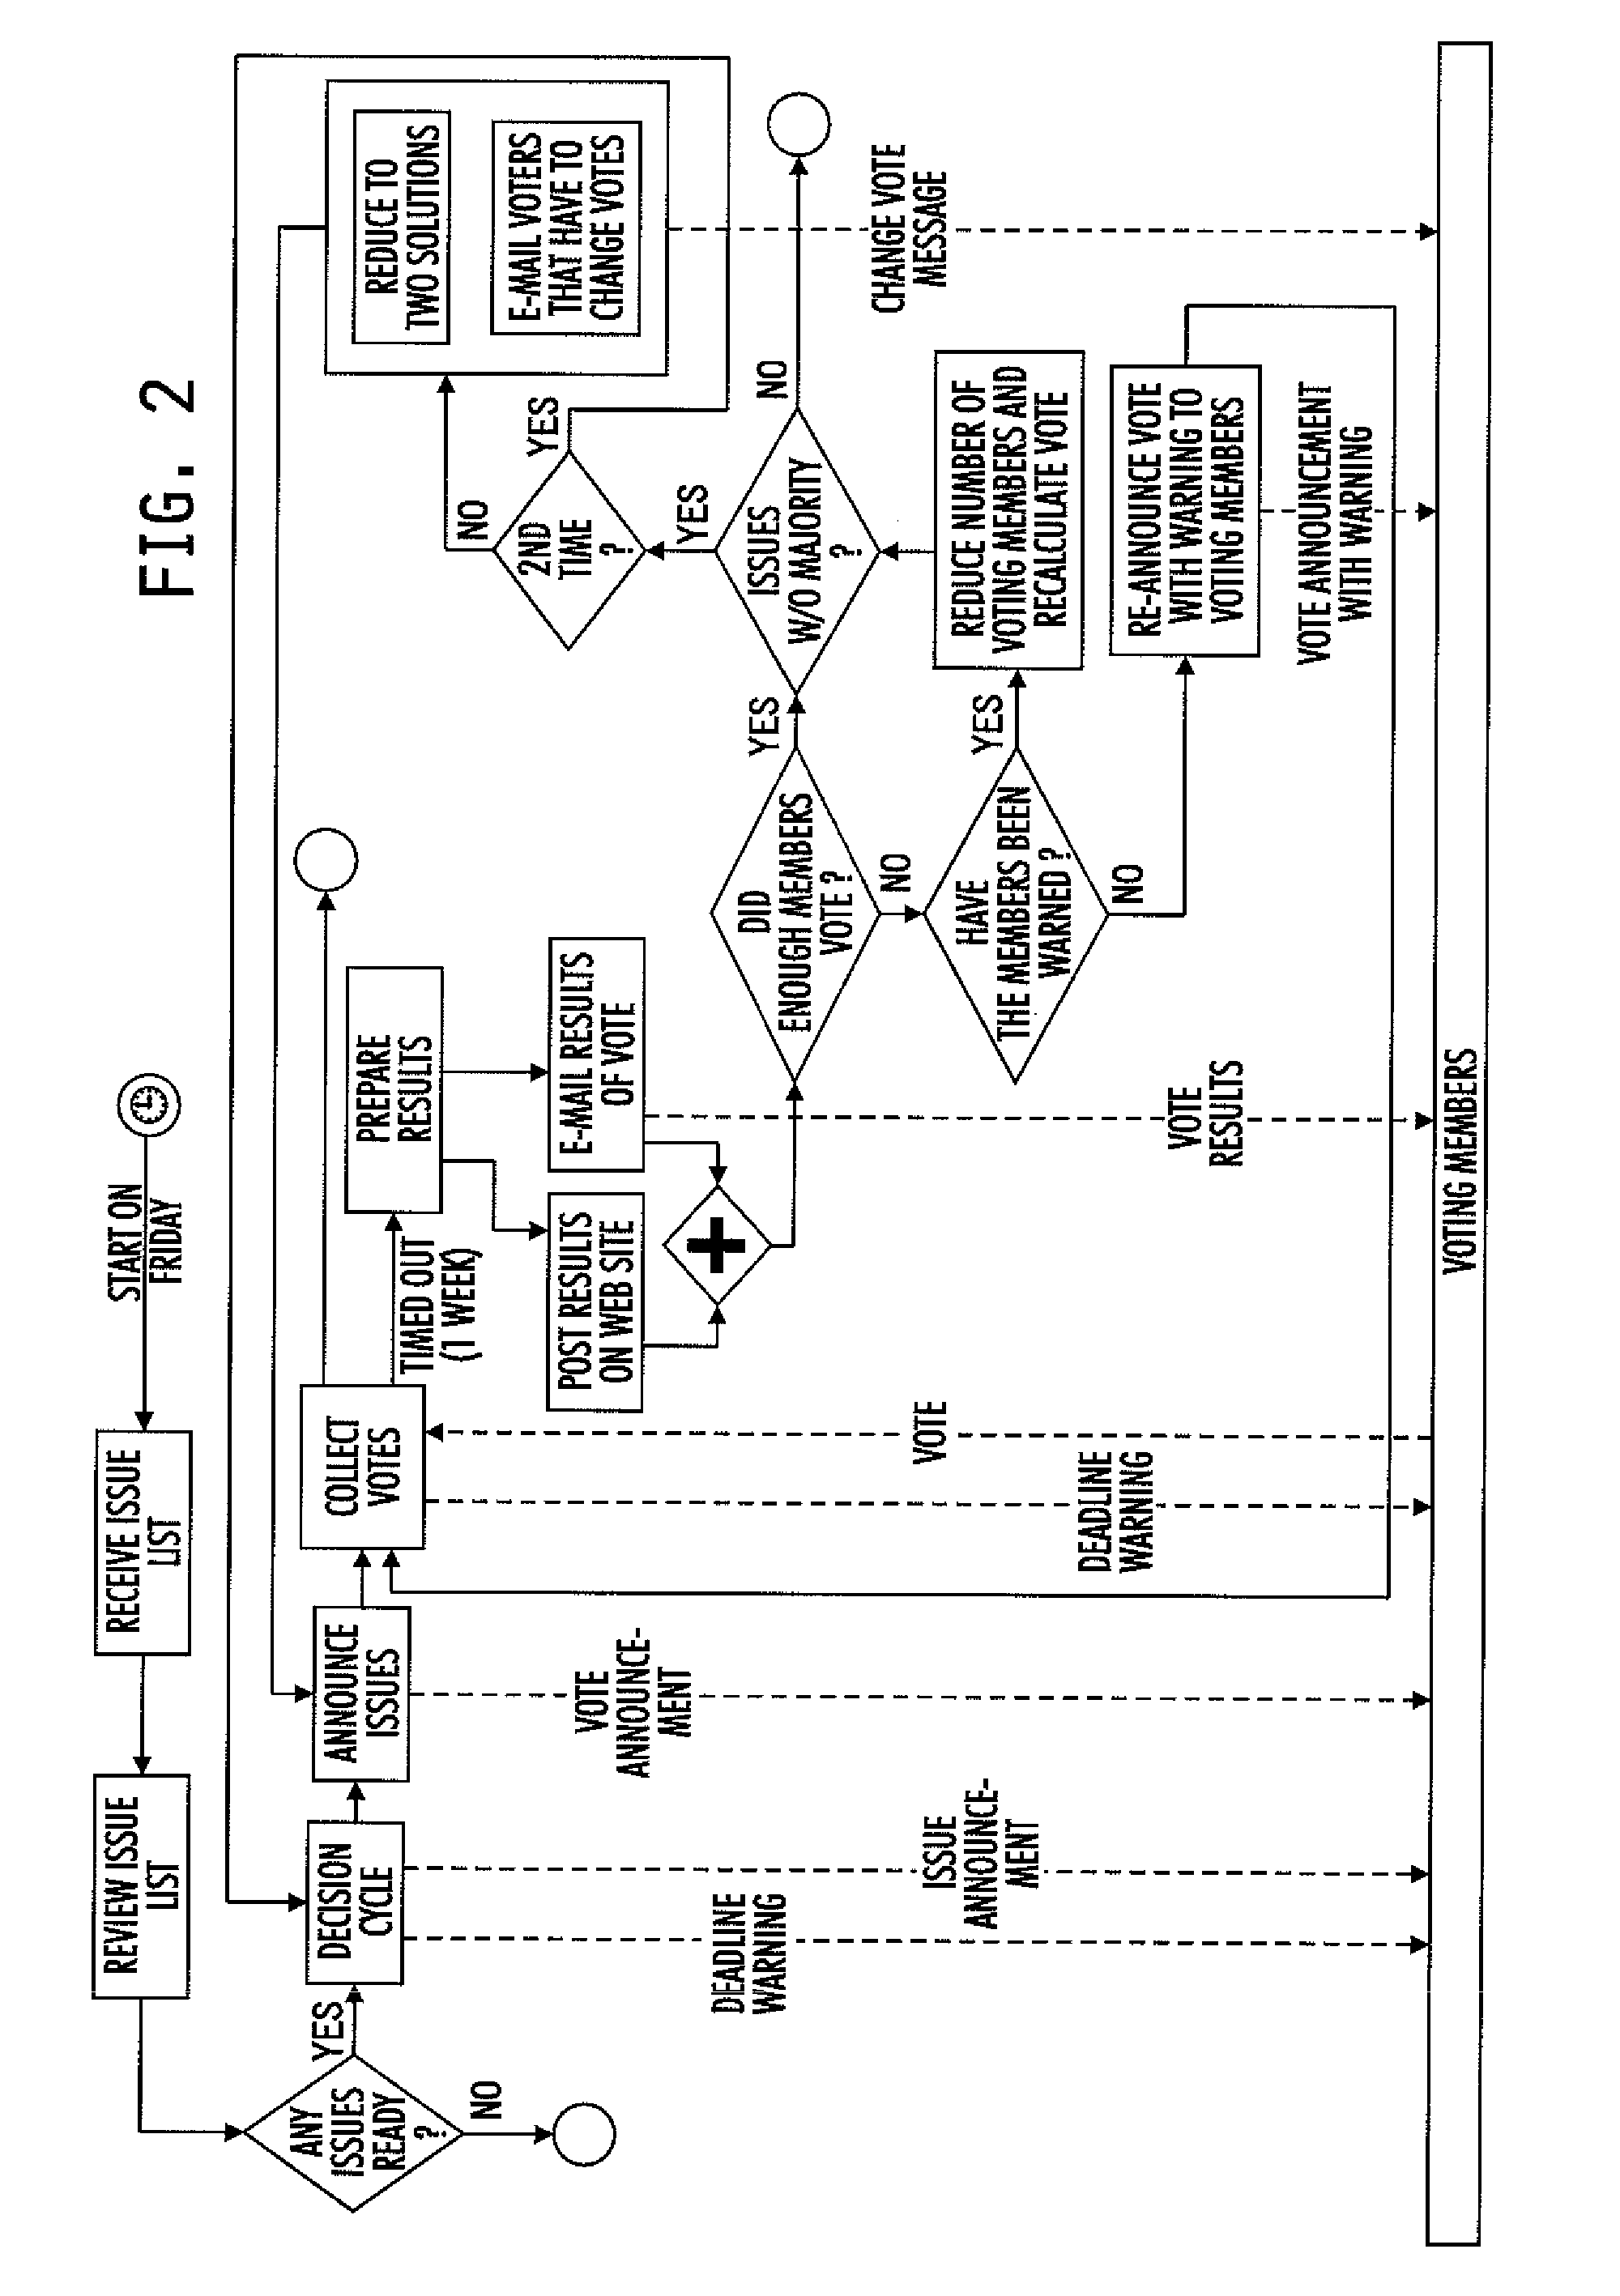 Method and system for managing enterprise workflow and information